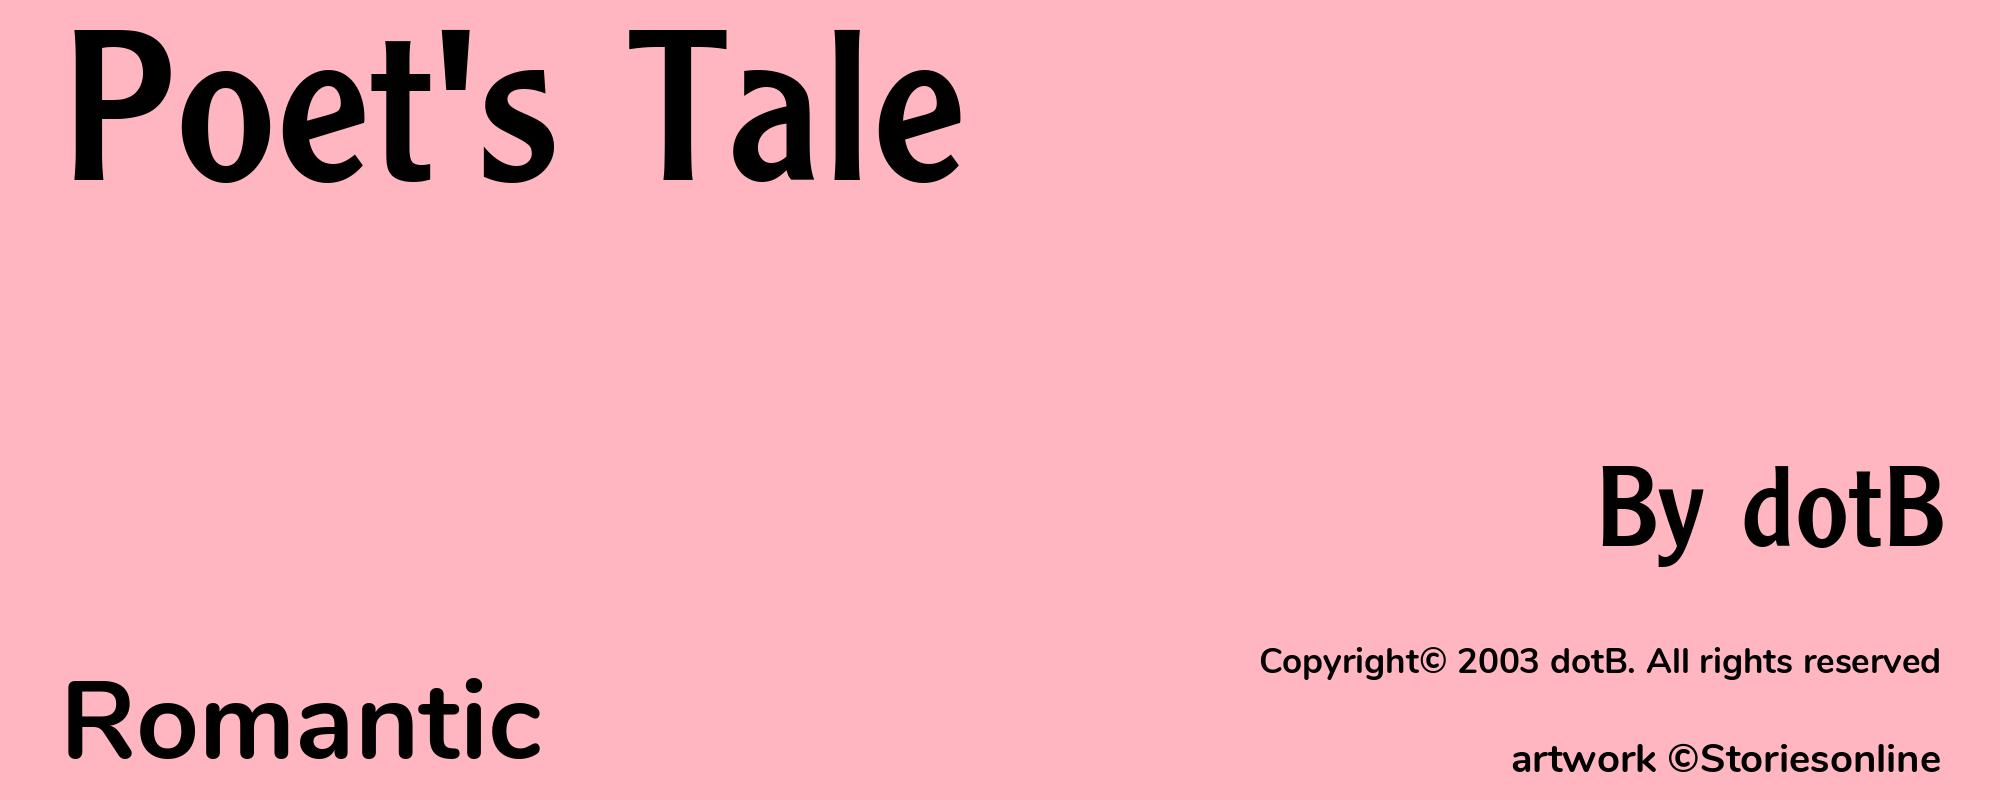 Poet's Tale - Cover